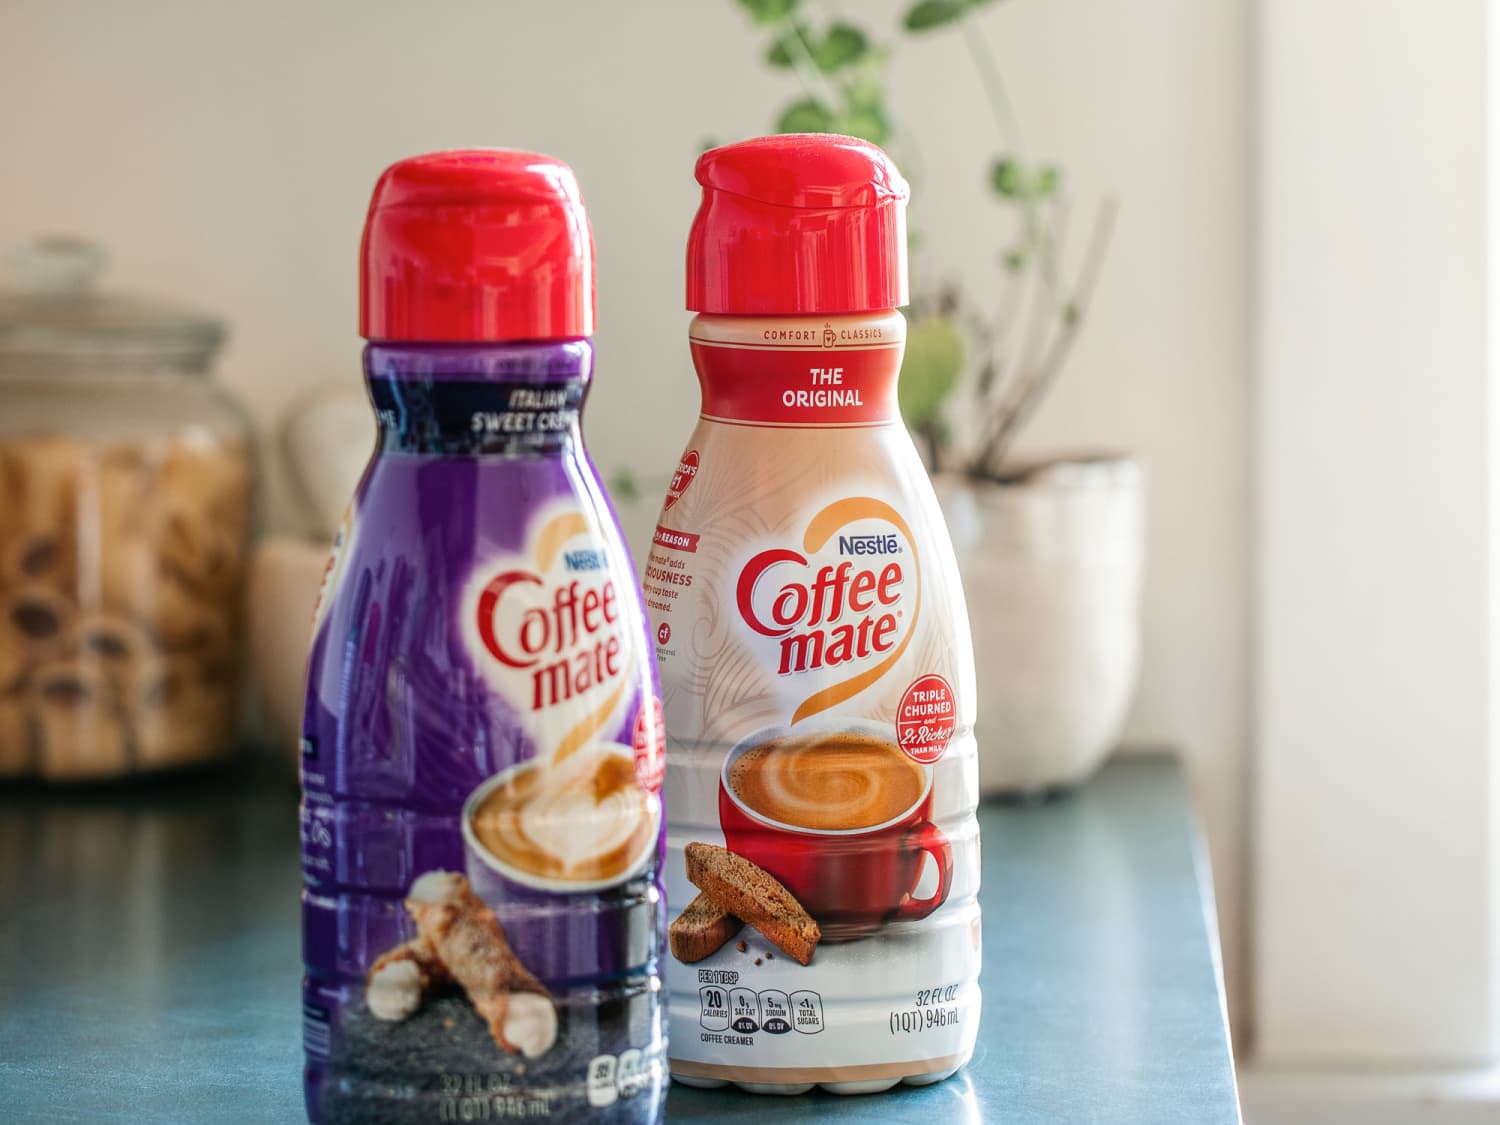 Use Empty Plastic Coffee Creamer Container as Storage for Dry Goods